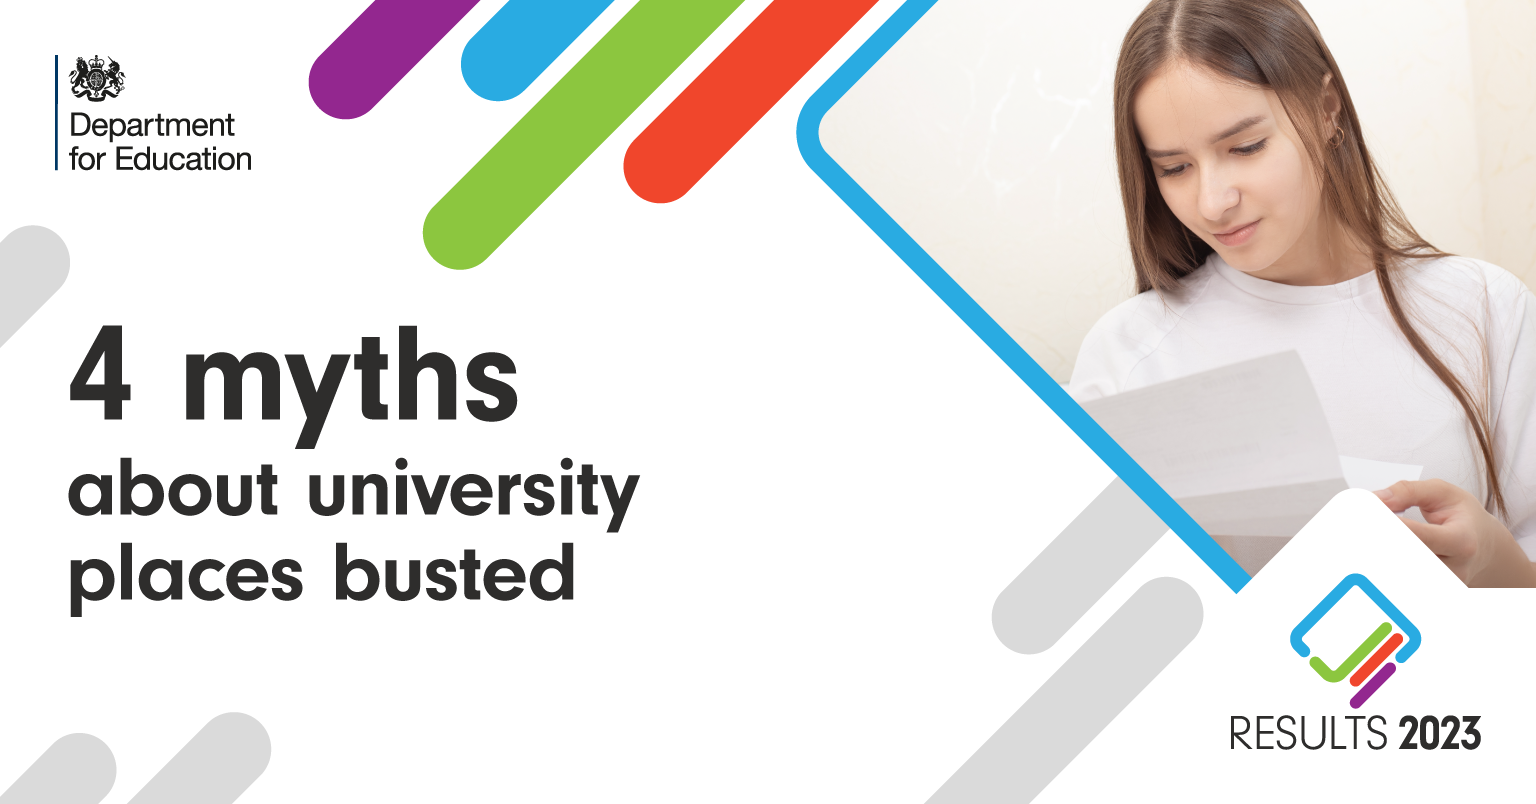 4 myths about university places busted